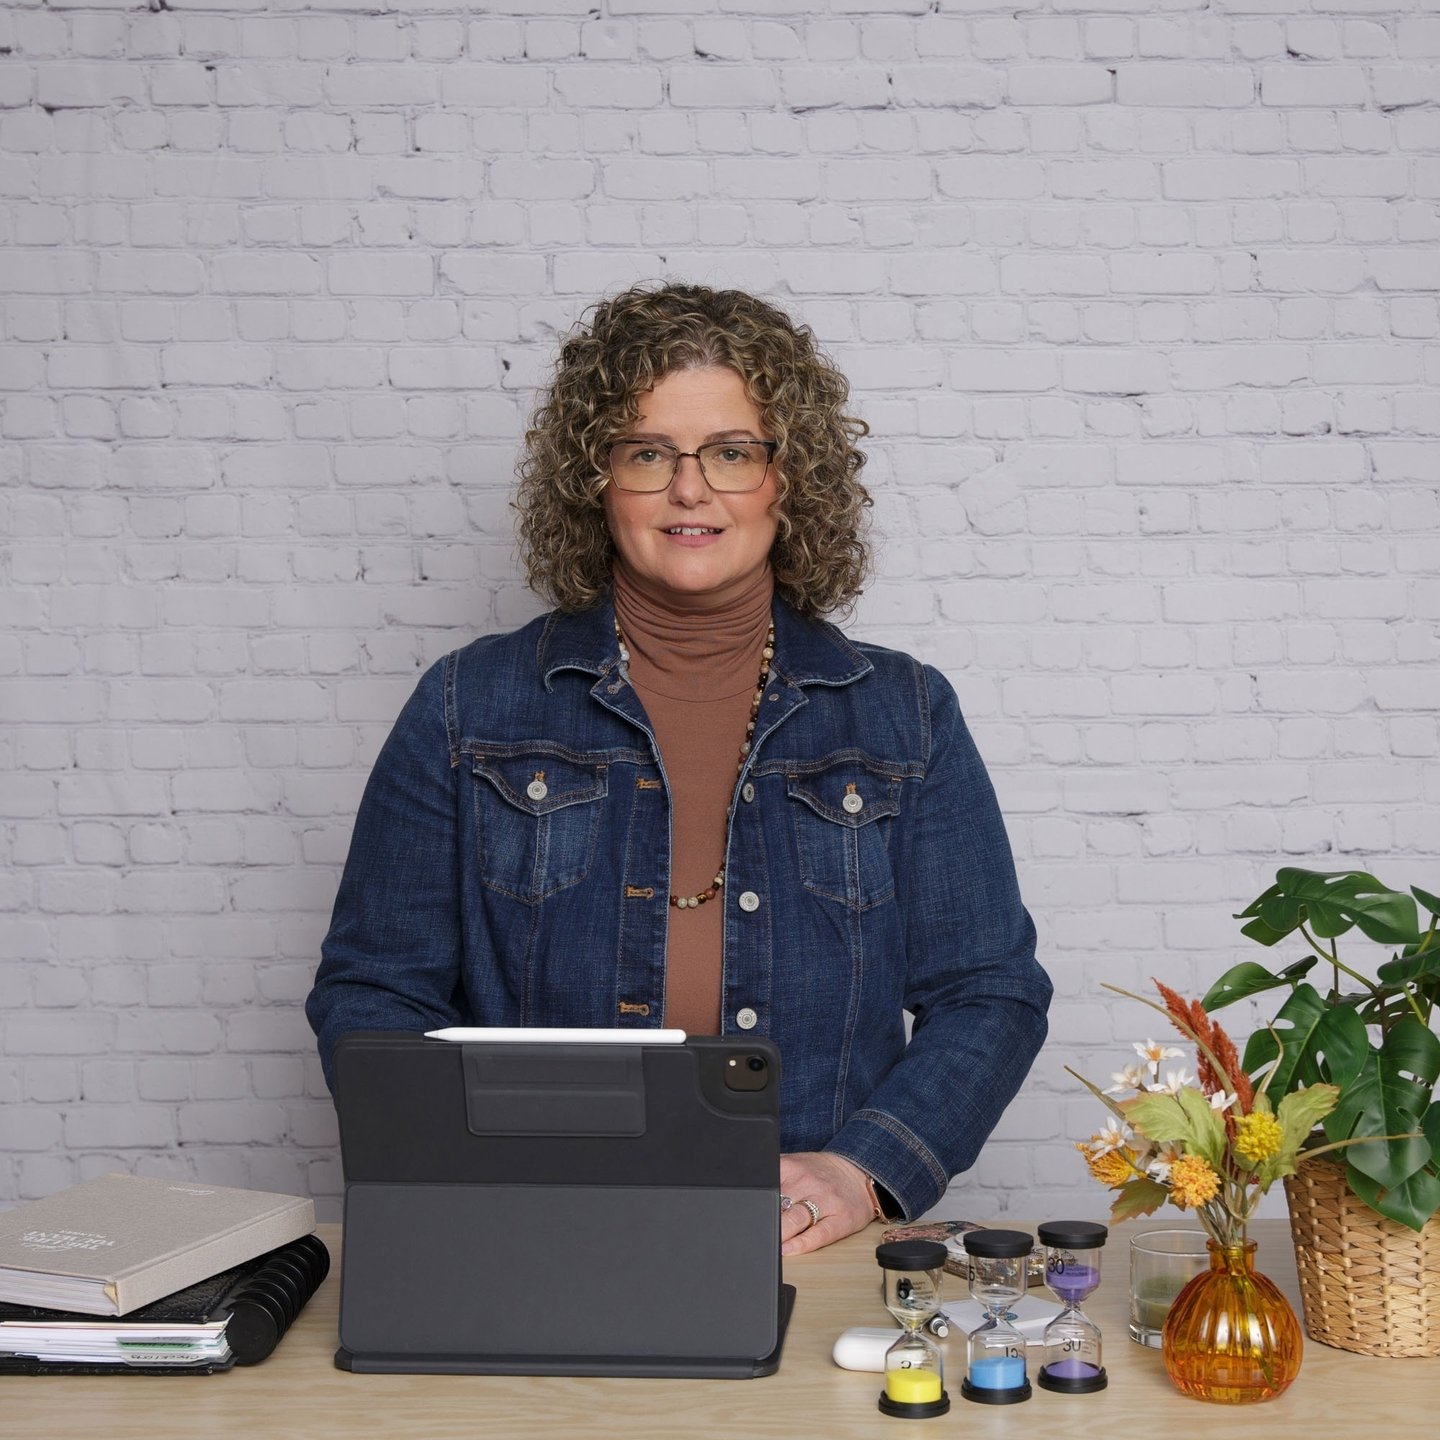 Behind every successful small business, there's a story of struggle, triumph, and determination. Meet Sabrina Quairoli, a beacon of guidance for small business owners. With over 25 years of experience under her belt, Sabrina embodies the spirit of ai